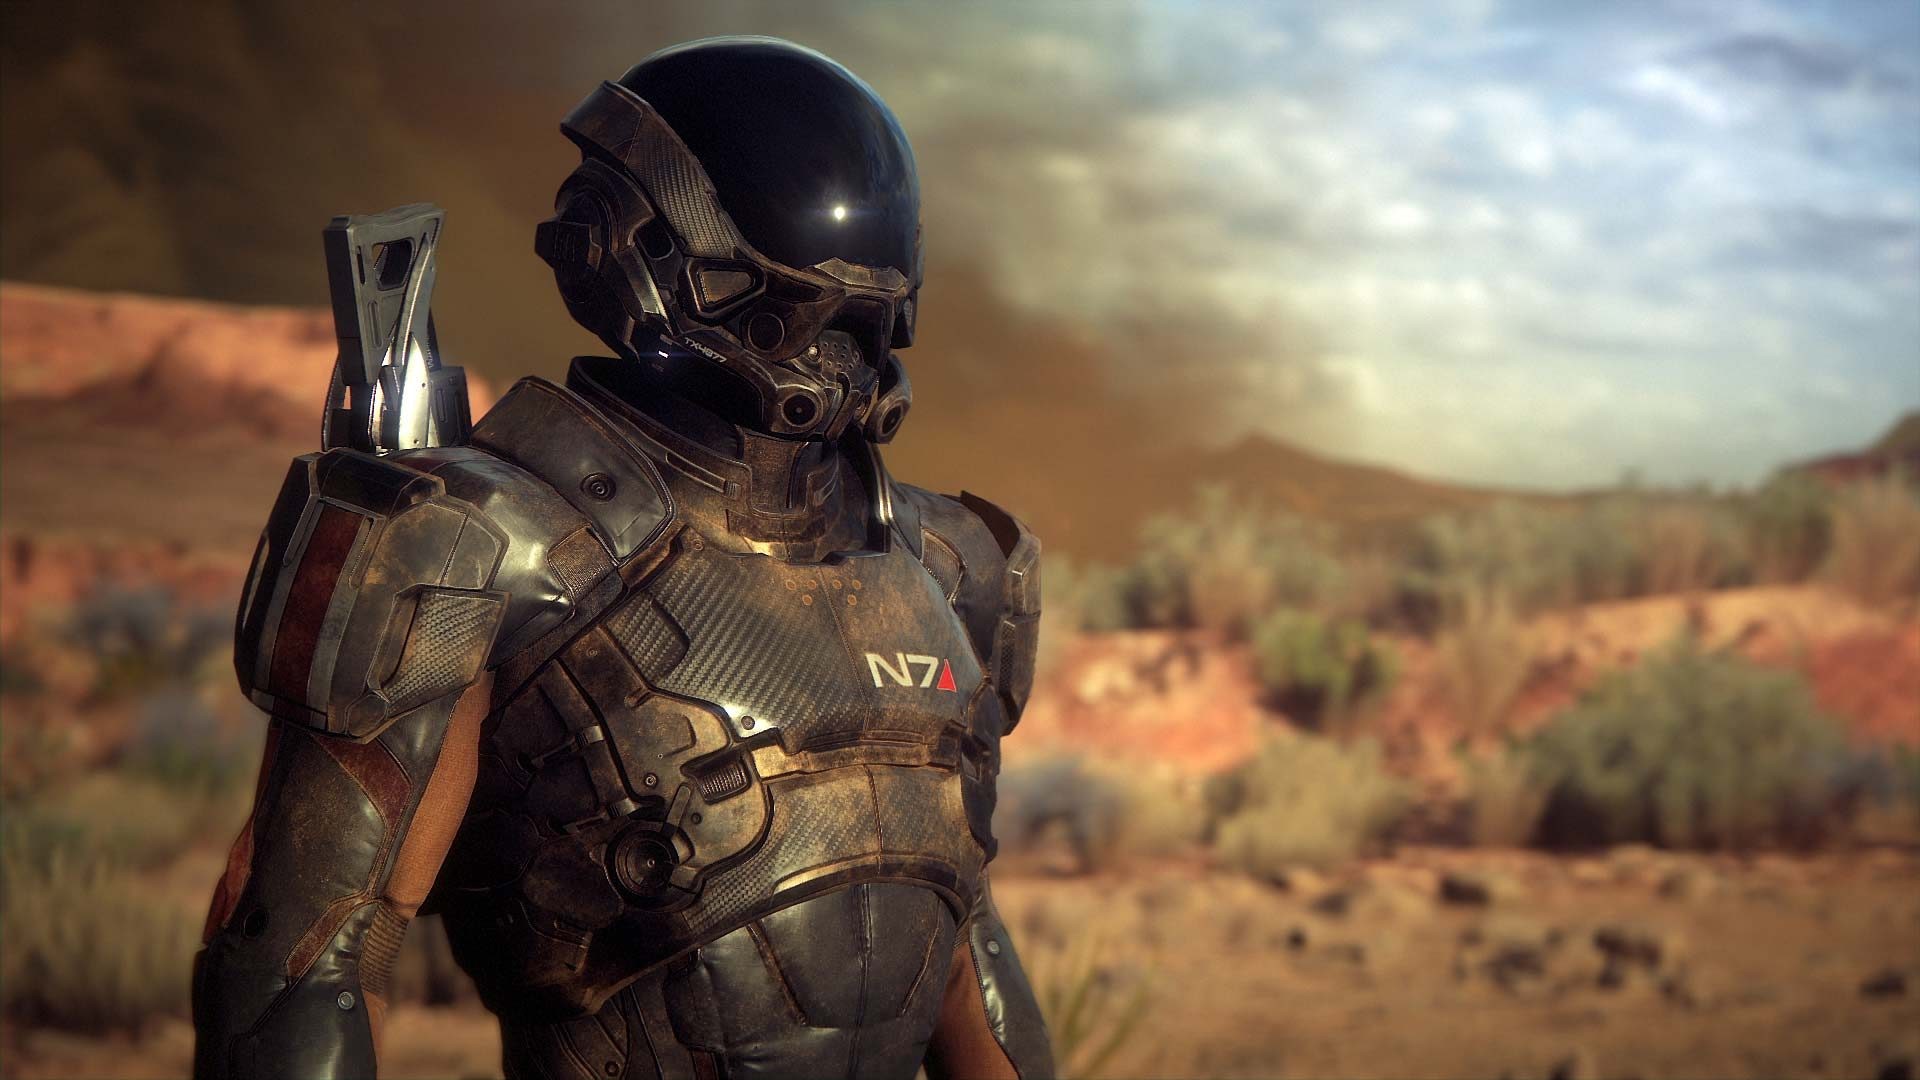 Wallpaper Video game, game, Mass Effect: Andromeda, N7, solider